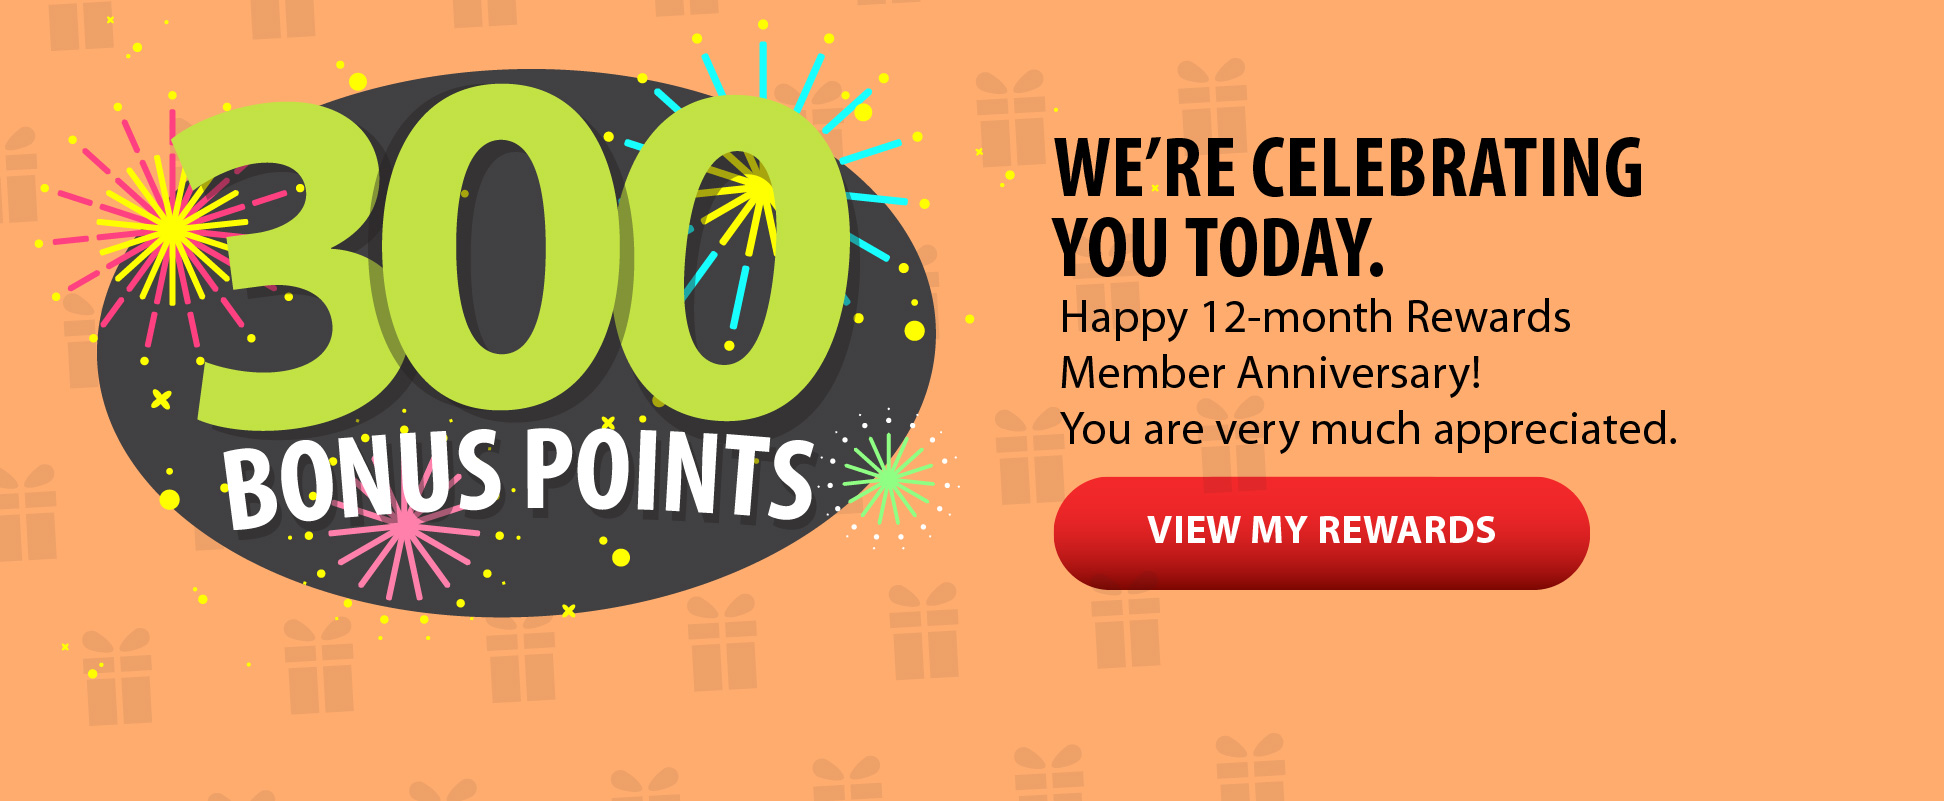 WE'RE CELEBRATING YOU TODAY. Happy
Straight Talk Rewards 12-month Member Anniversary! You are very much appreciated. VIEW MY REWARDS